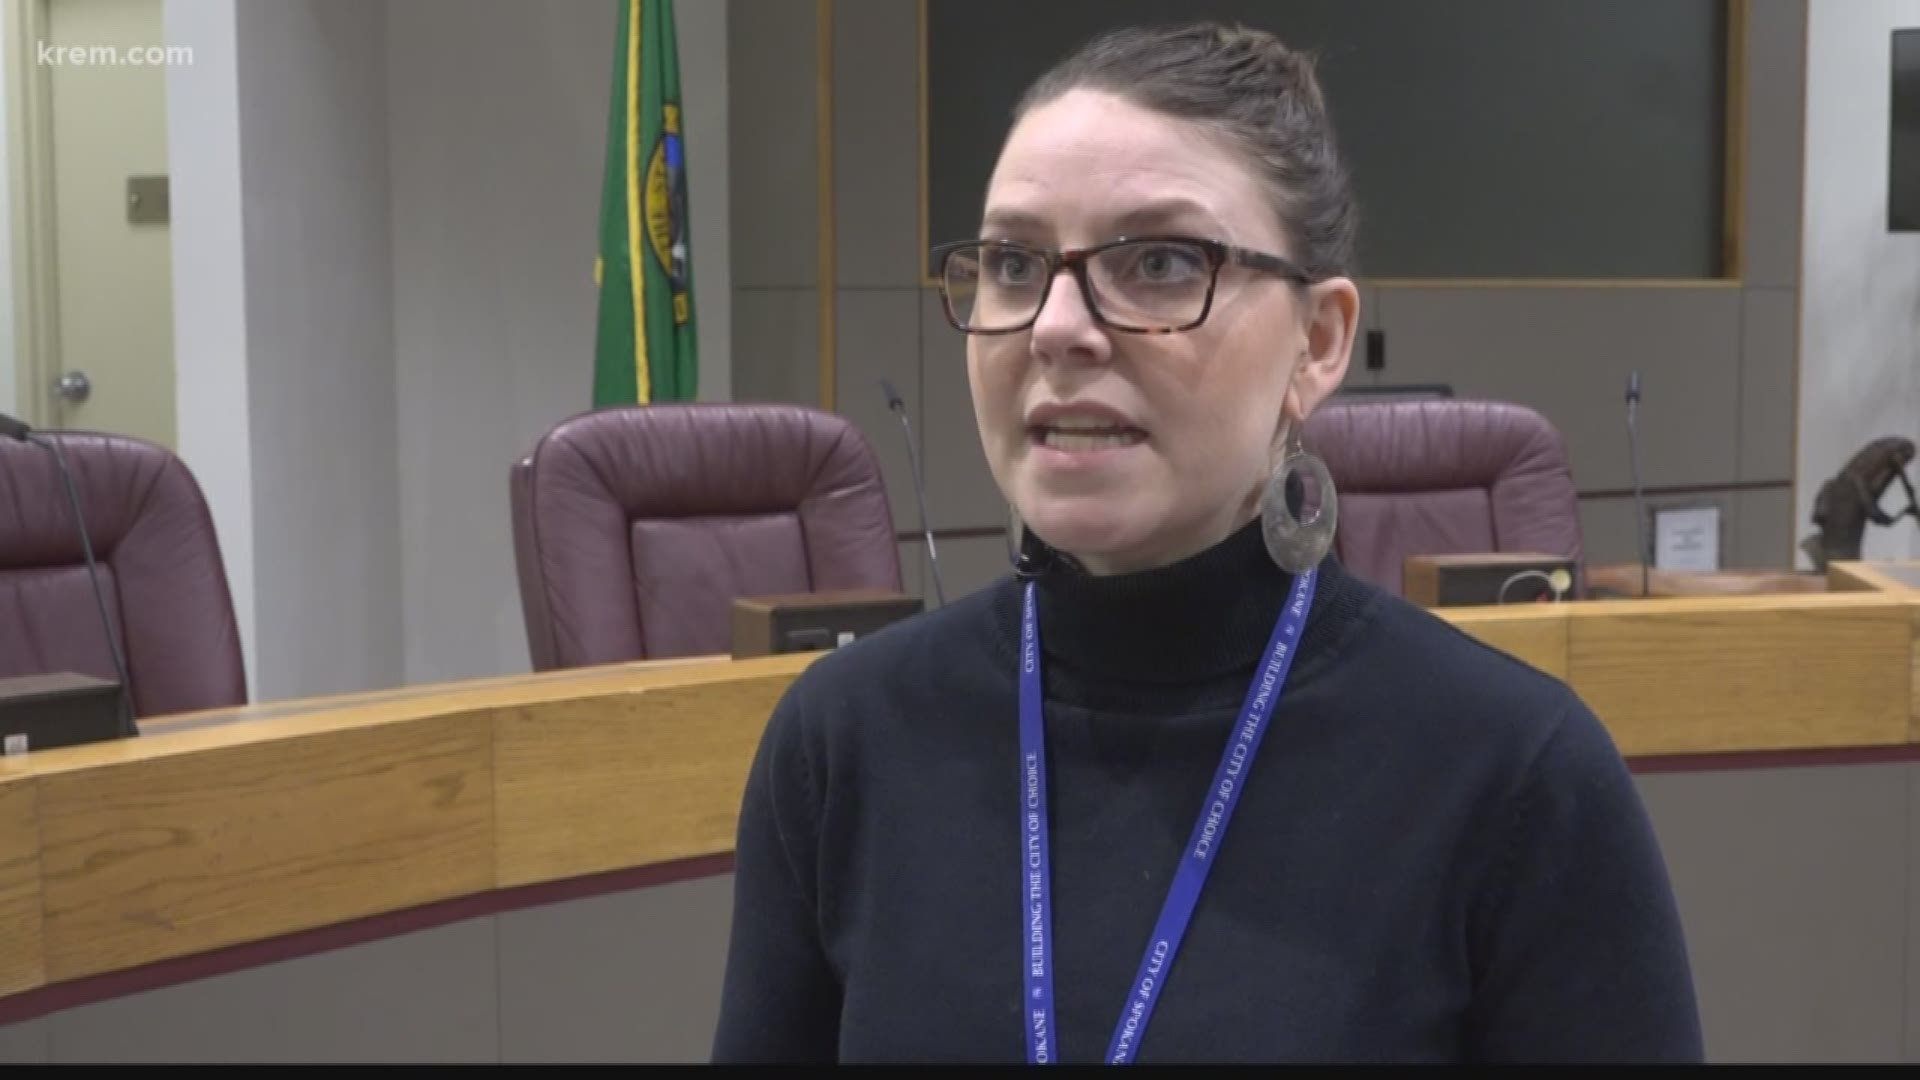 "Perspectives. It's all about perspectives," said Councilwoman Kate Burke. Wednesday's was the last in a series of four similar forums tackling housing policy.